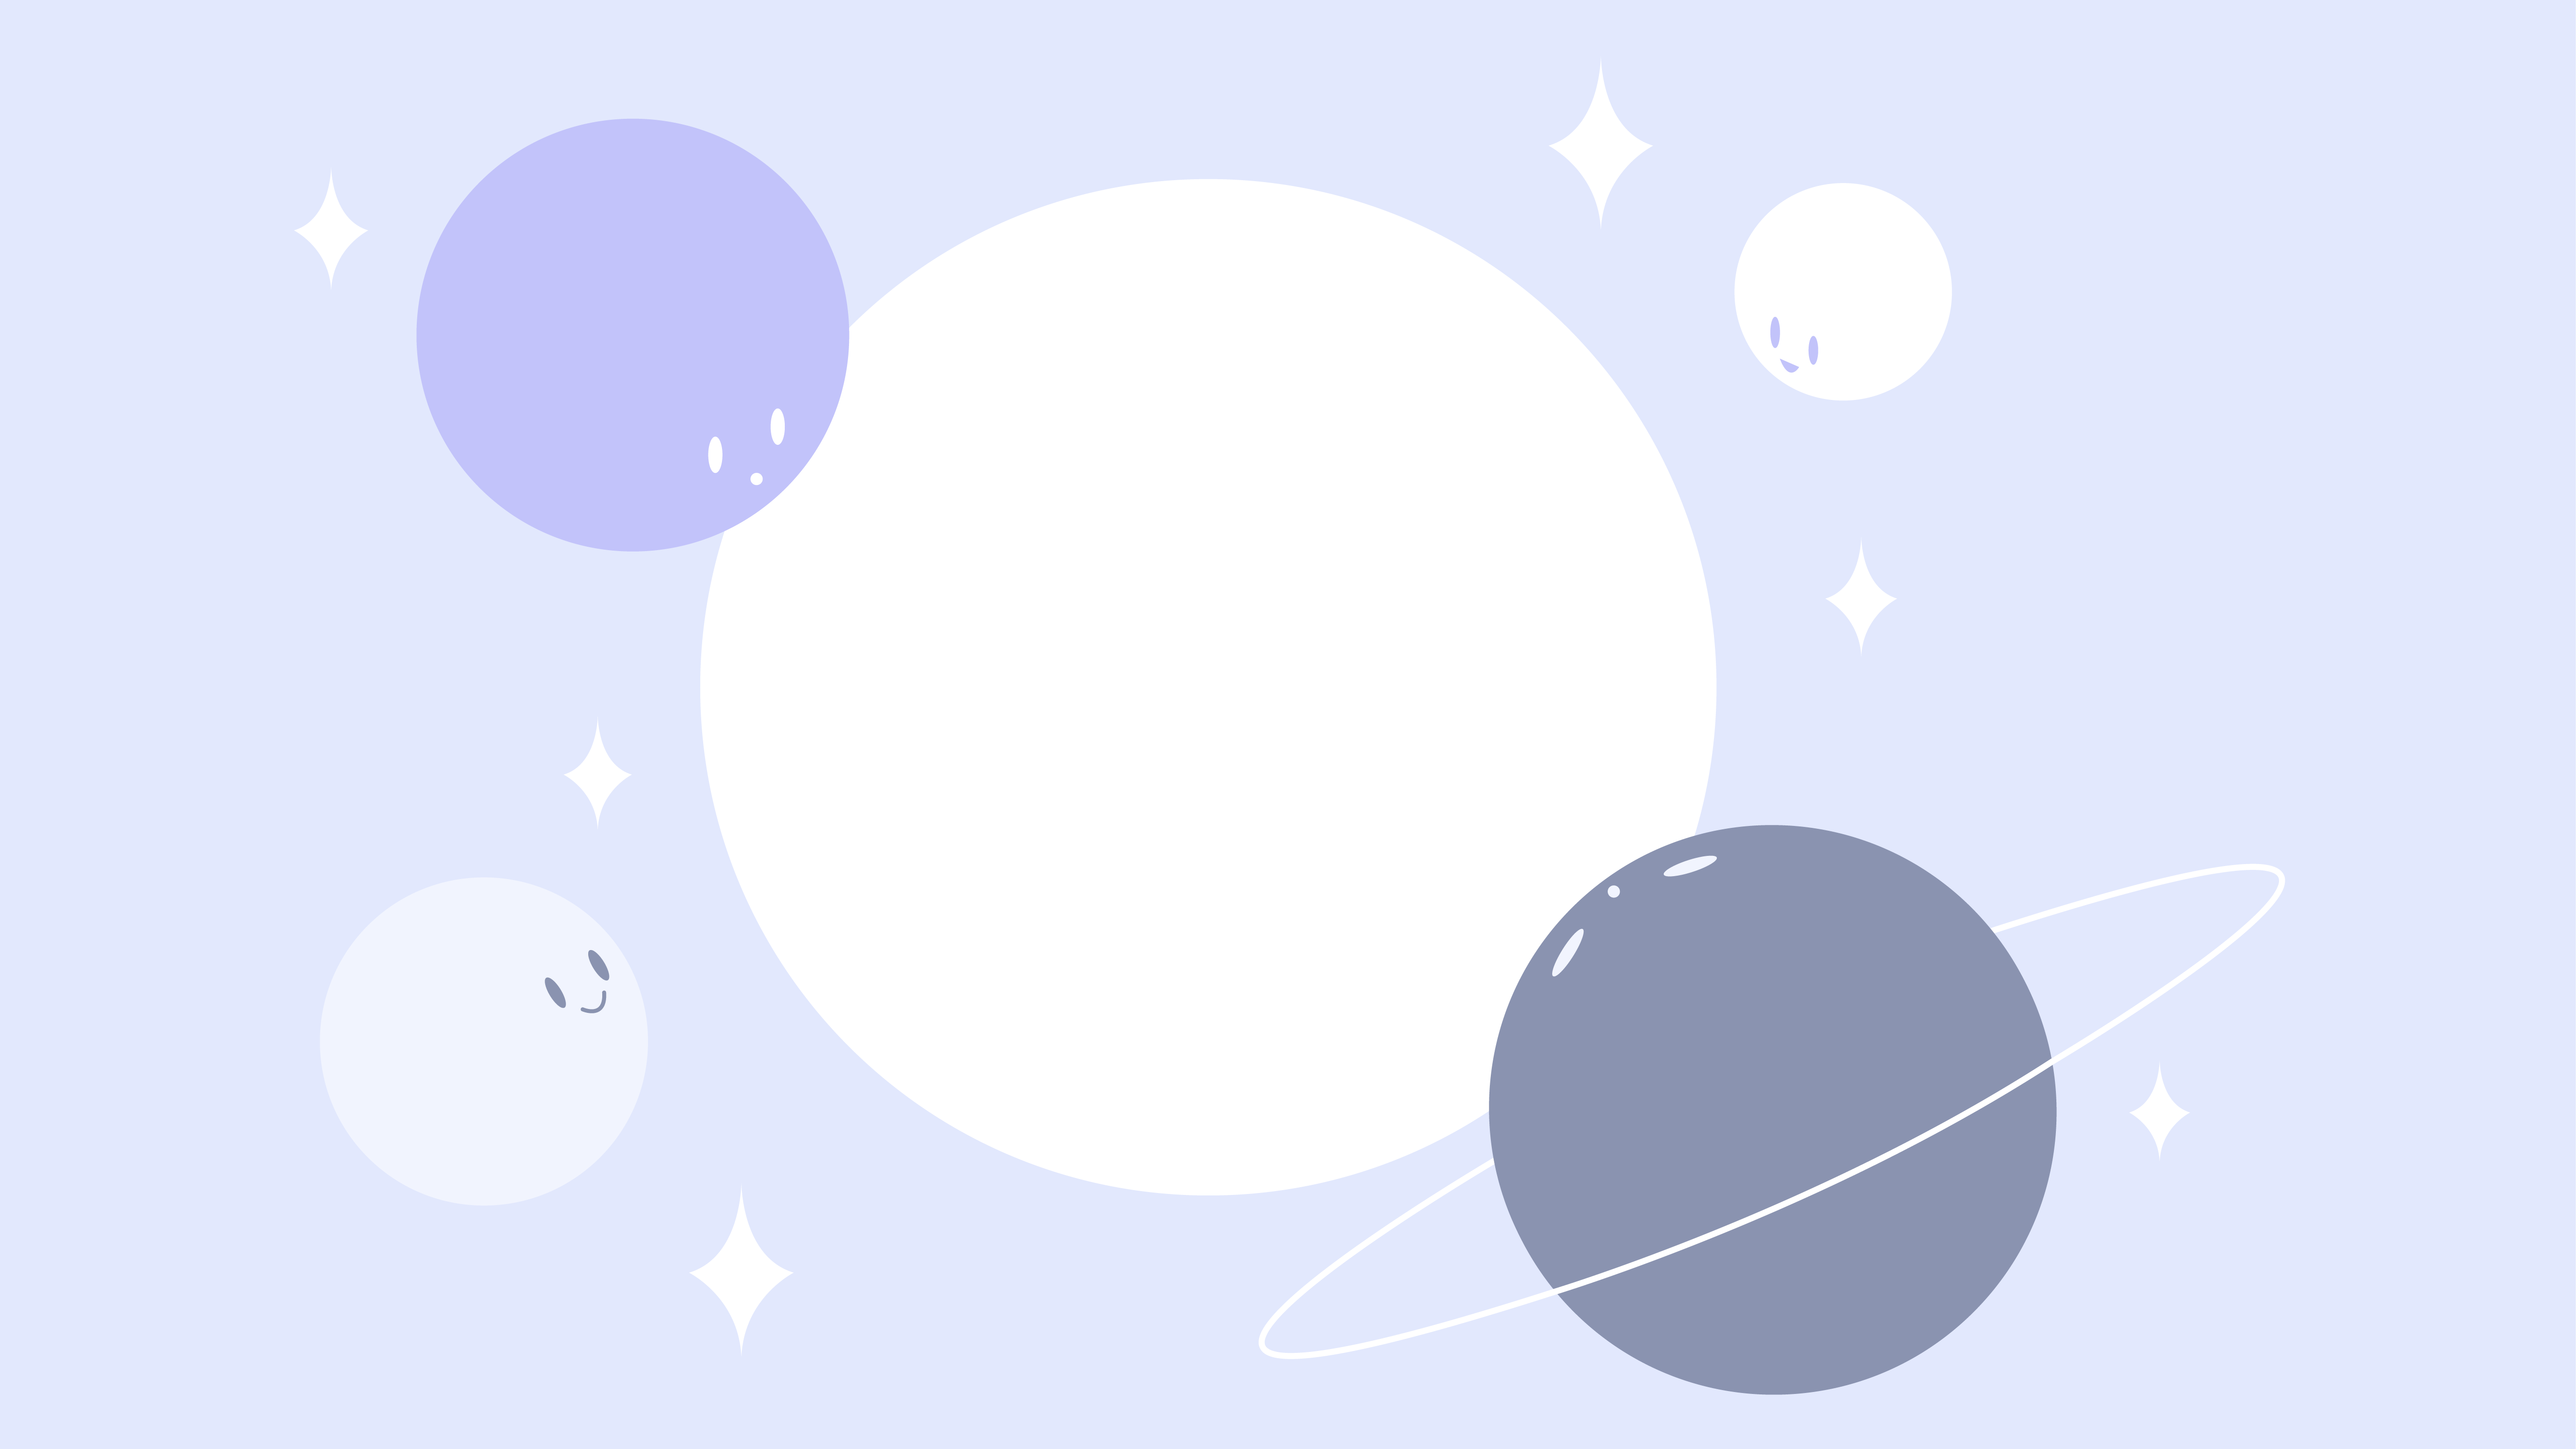 Graphic of planets and stars with an illustration of the artist